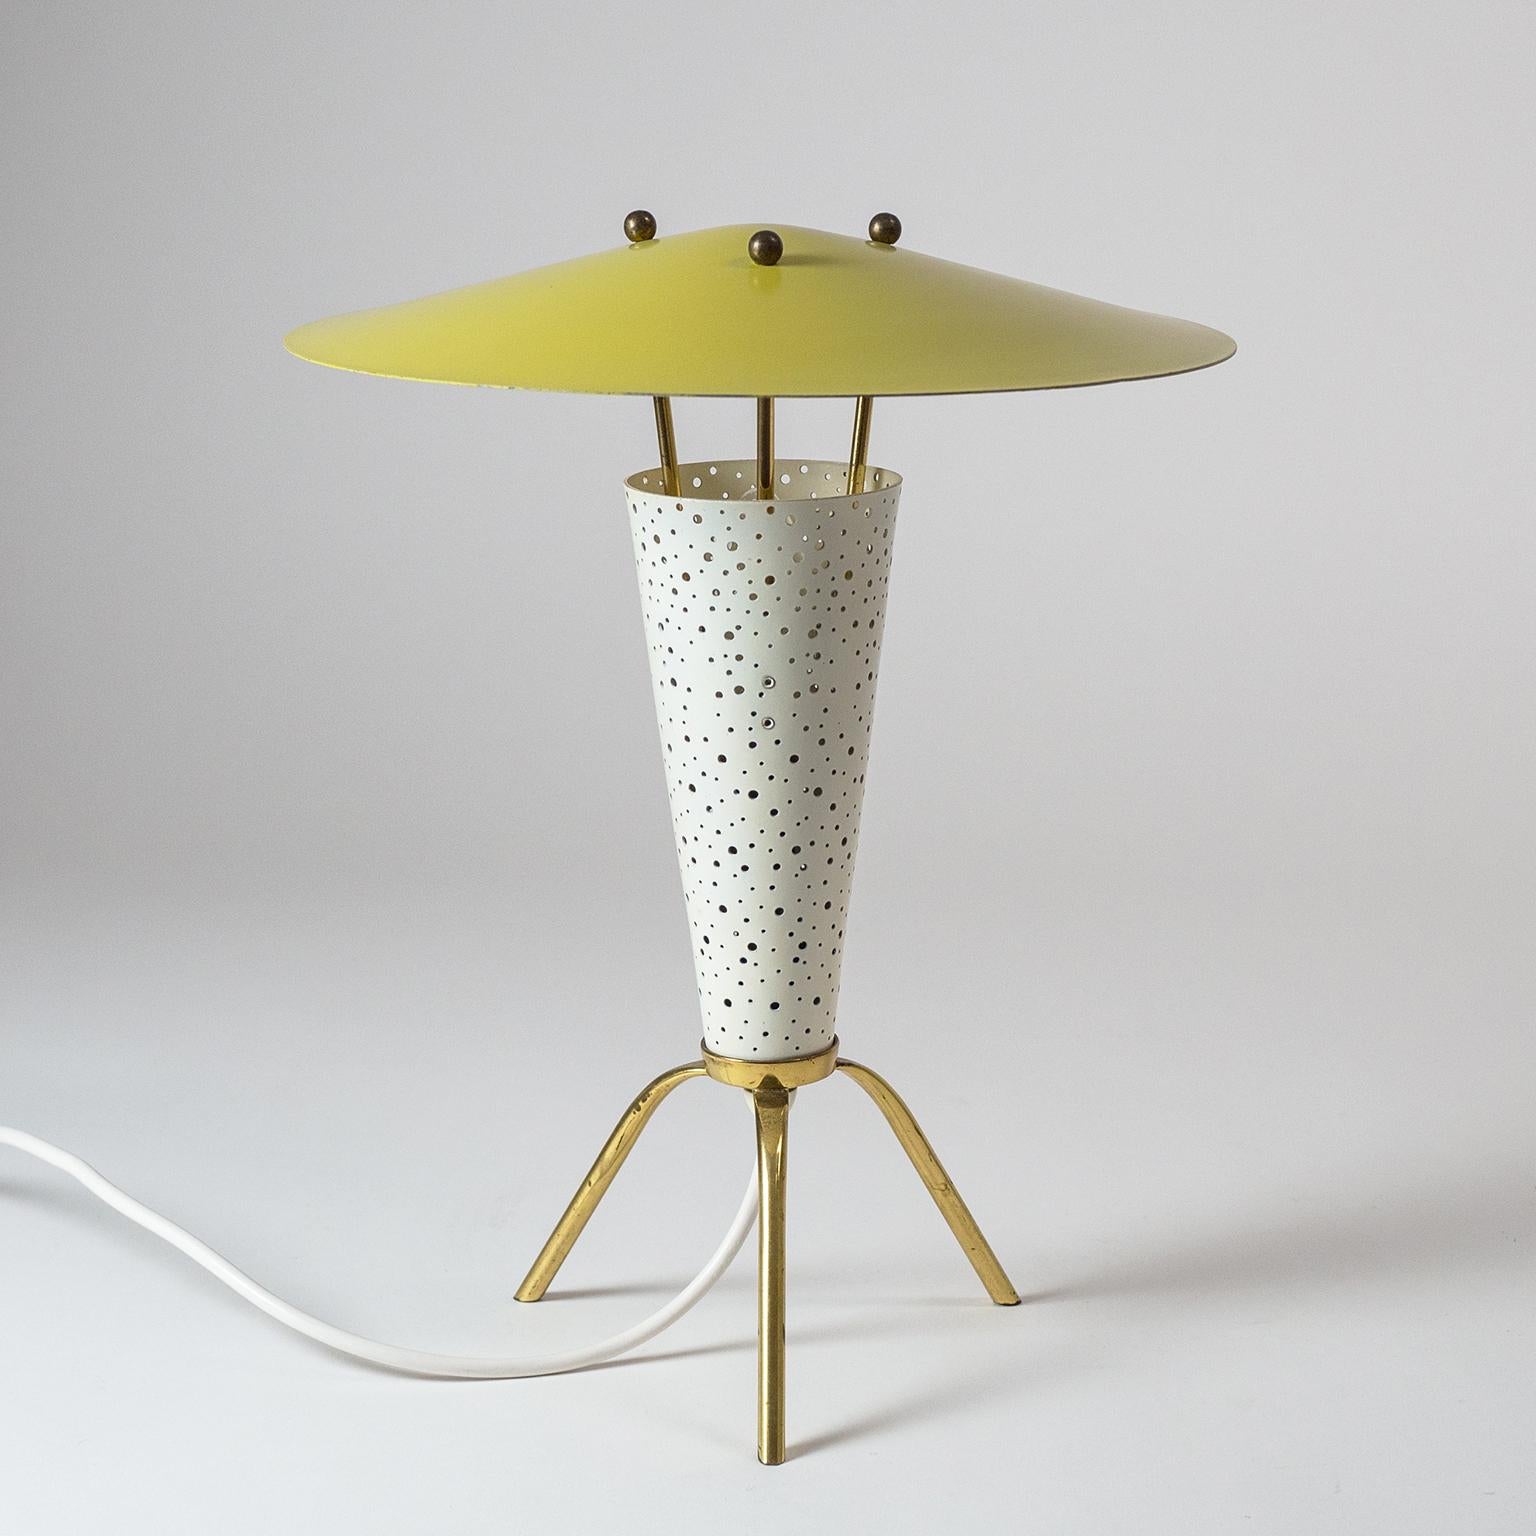 Delightful Mid-Century tripod table or desk lamp attributed to Ernest Igl. His trademark use of perforations of varying size is taken to the extreme in this gem of a table lamp. The light effect is simply spell binding and even when switched of the